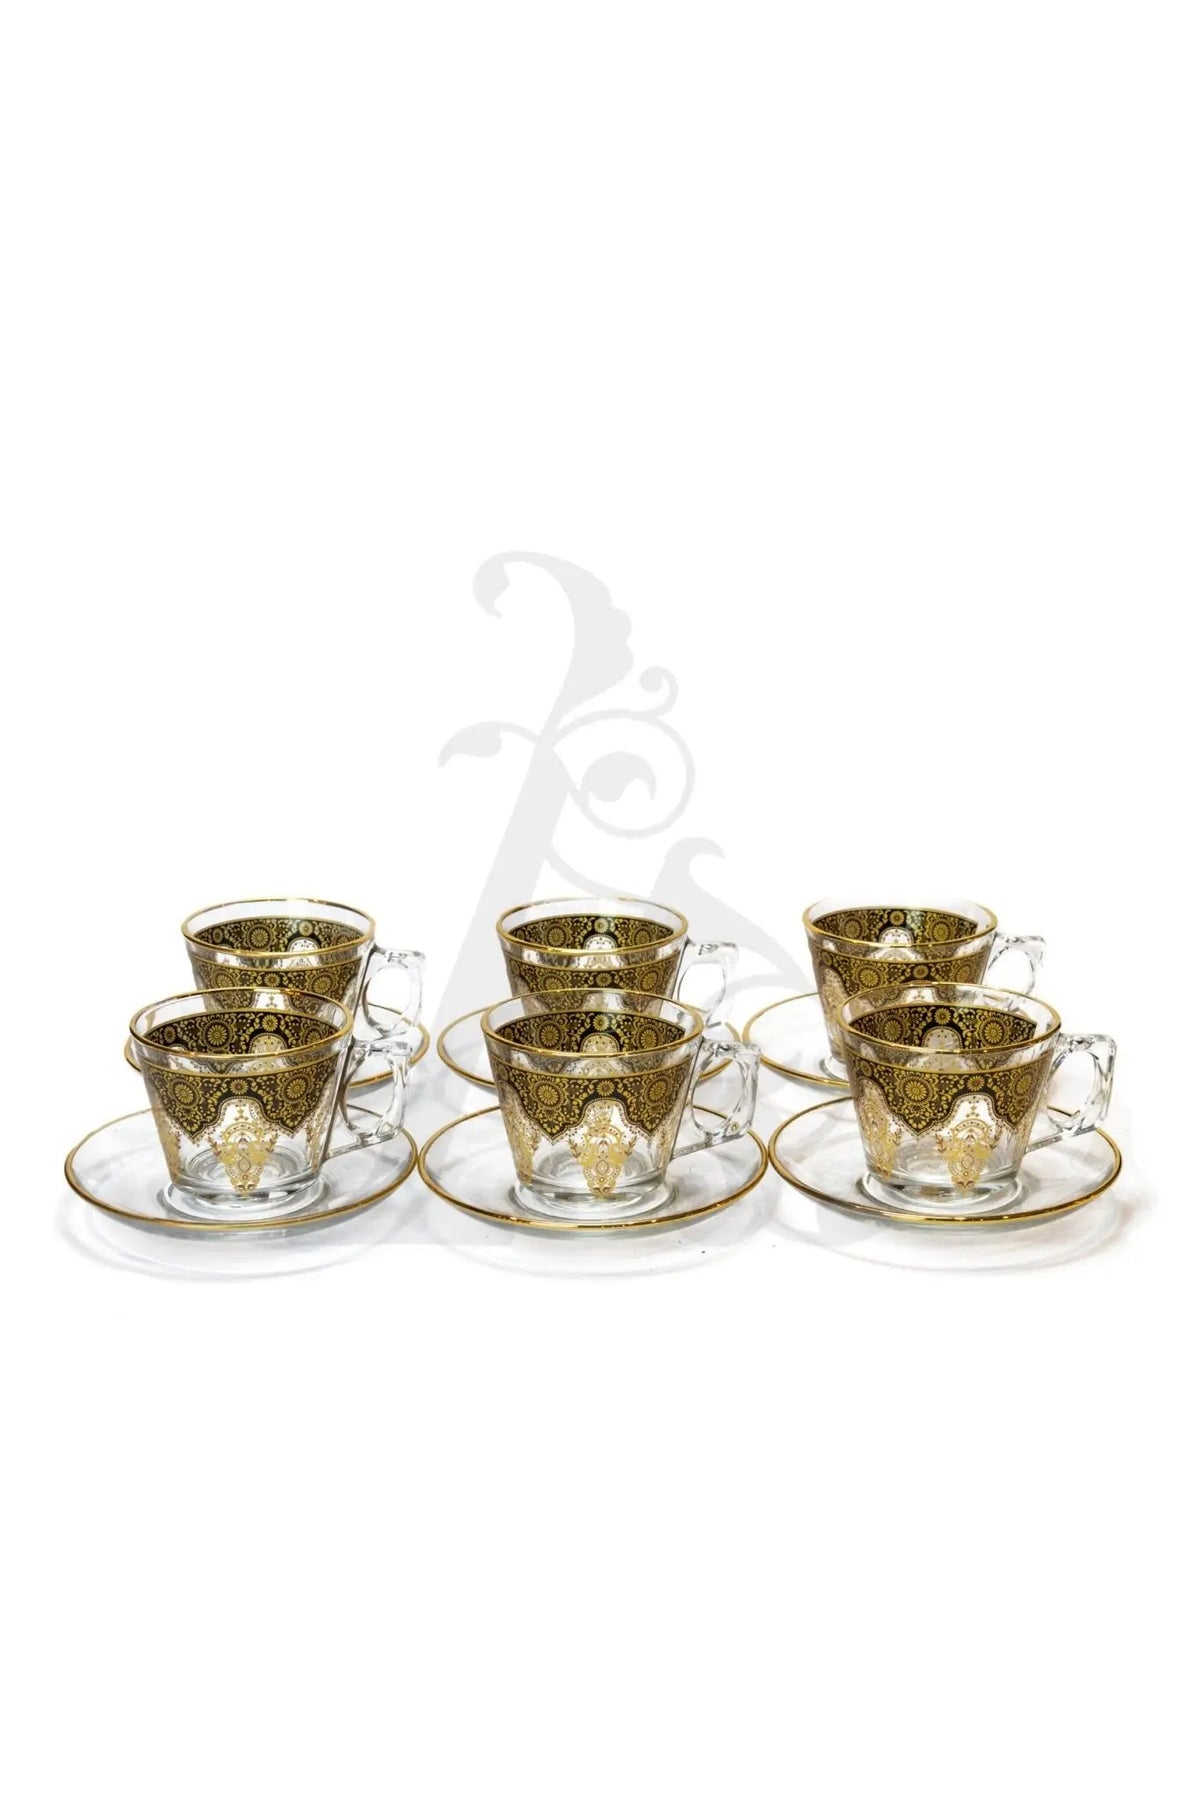 Short Glass Tea/Coffee Cup and Saucer Set With Handle and Black Border 12pcs 97302 - Lemons